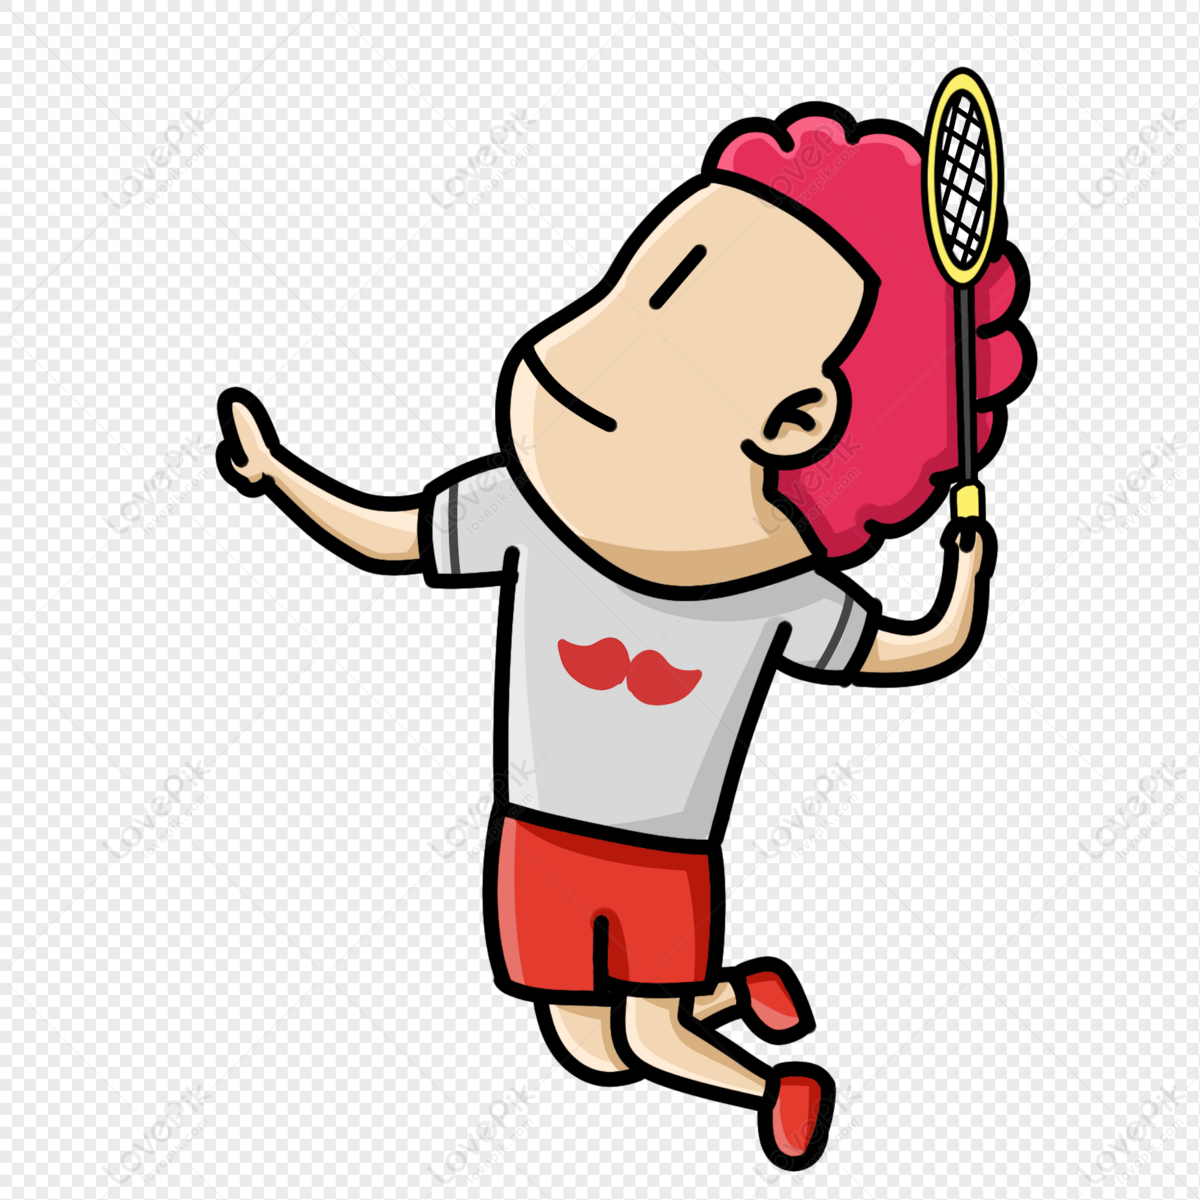 Badminton Player Free PNG And Clipart Image For Free Download - Lovepik |  401397529